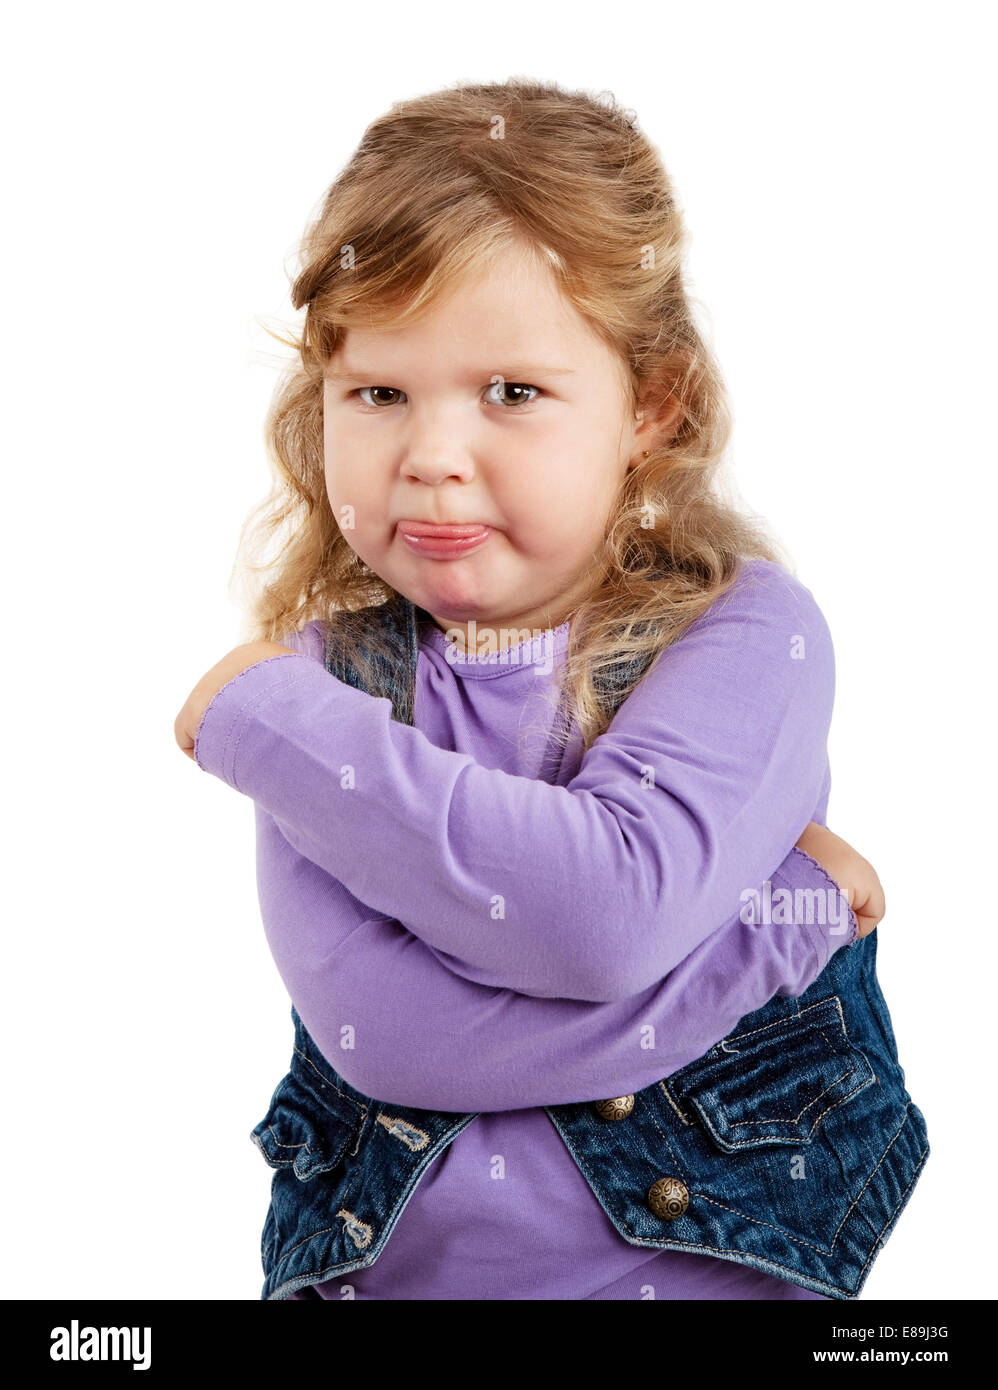 sulky angry young girl on white background Stock Photo